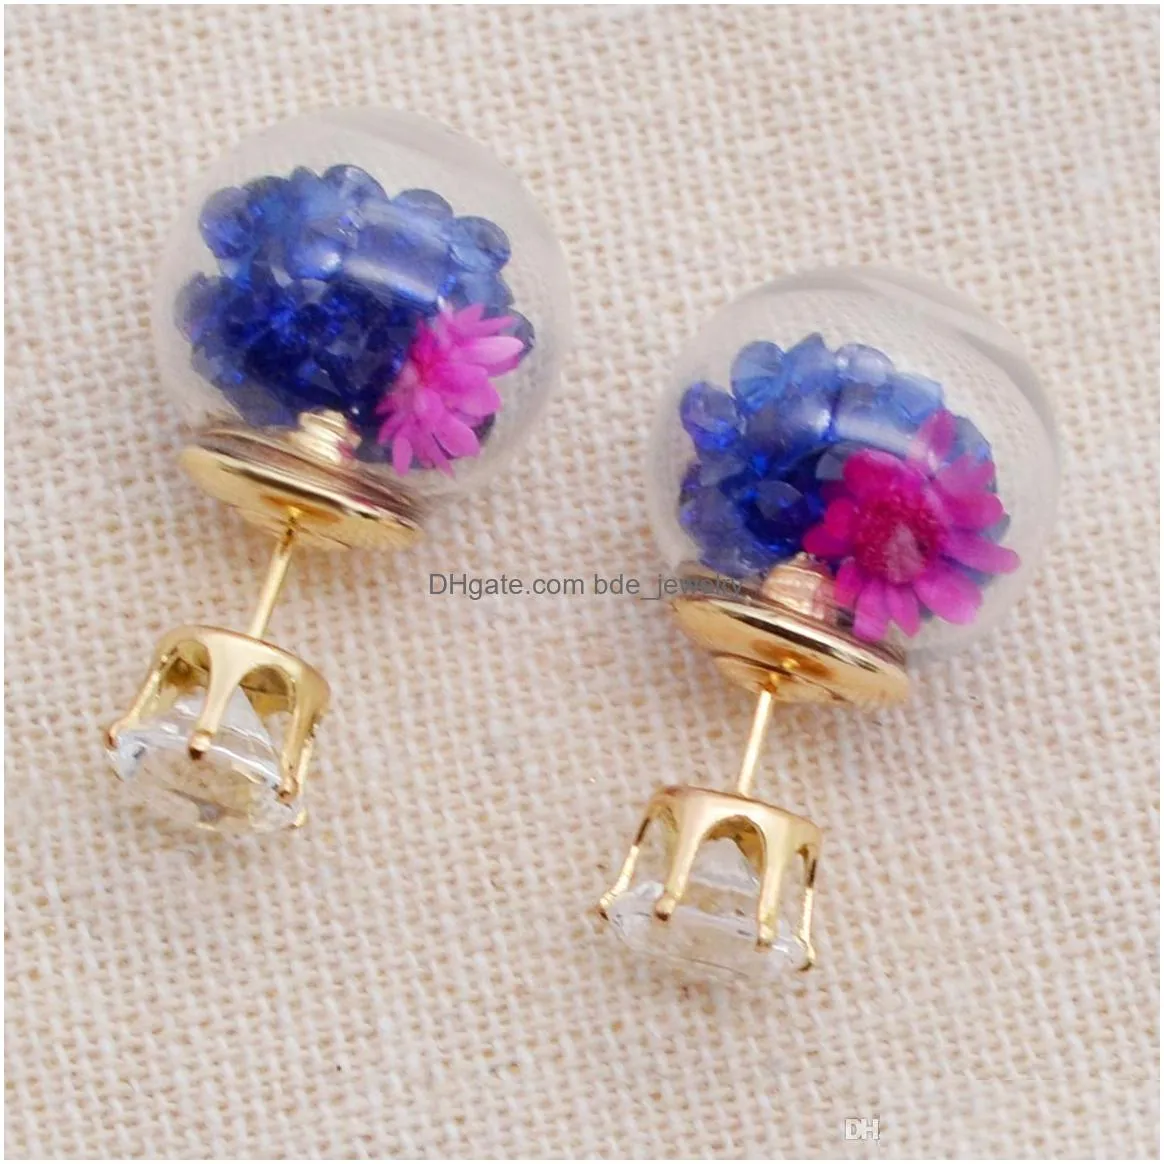 botanical natural jewelry glass container floral pendant earrings real dried flower earrings